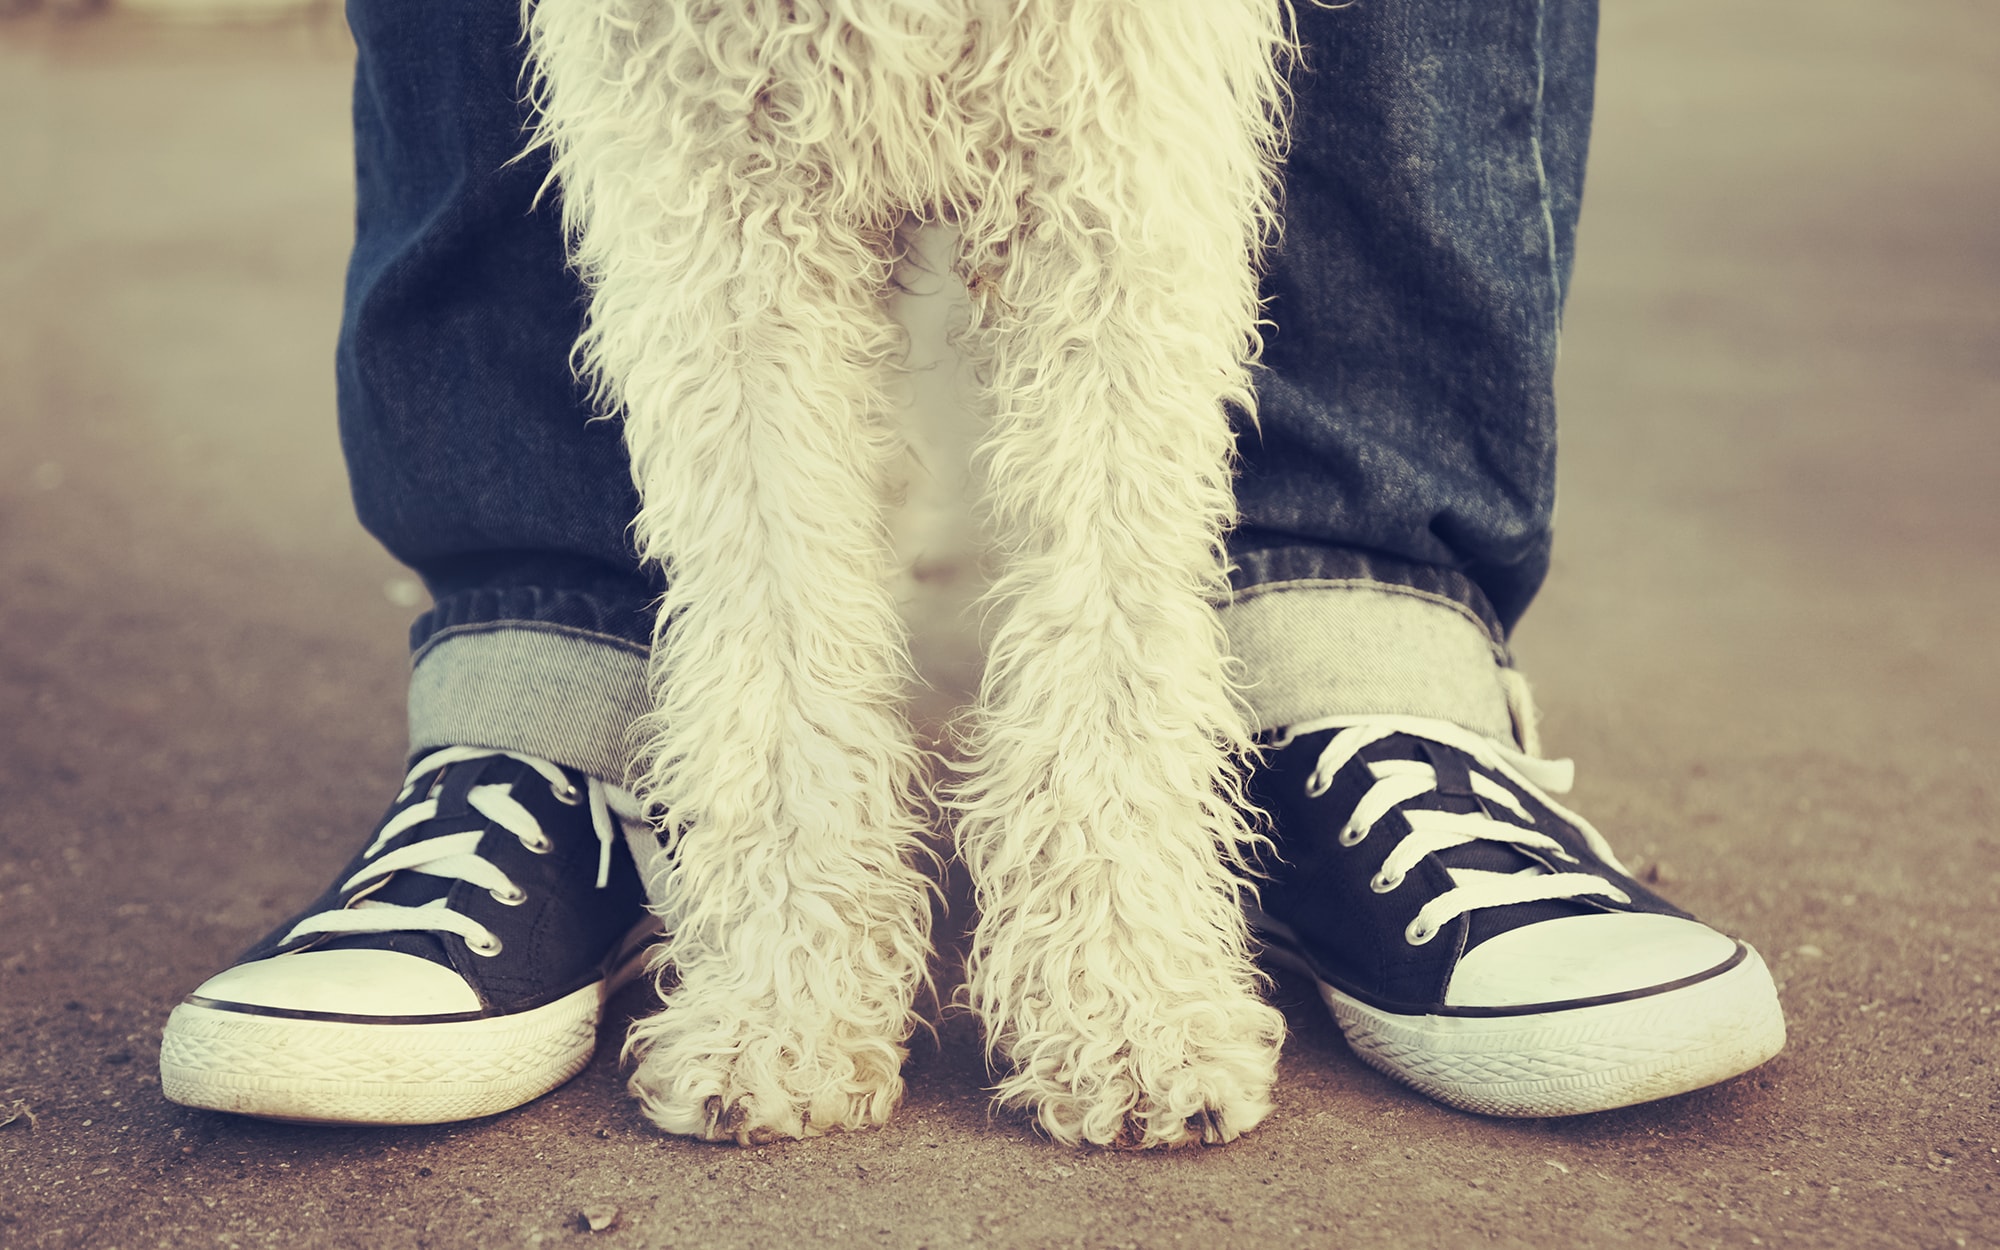 Small dog standing in between it's owners feet